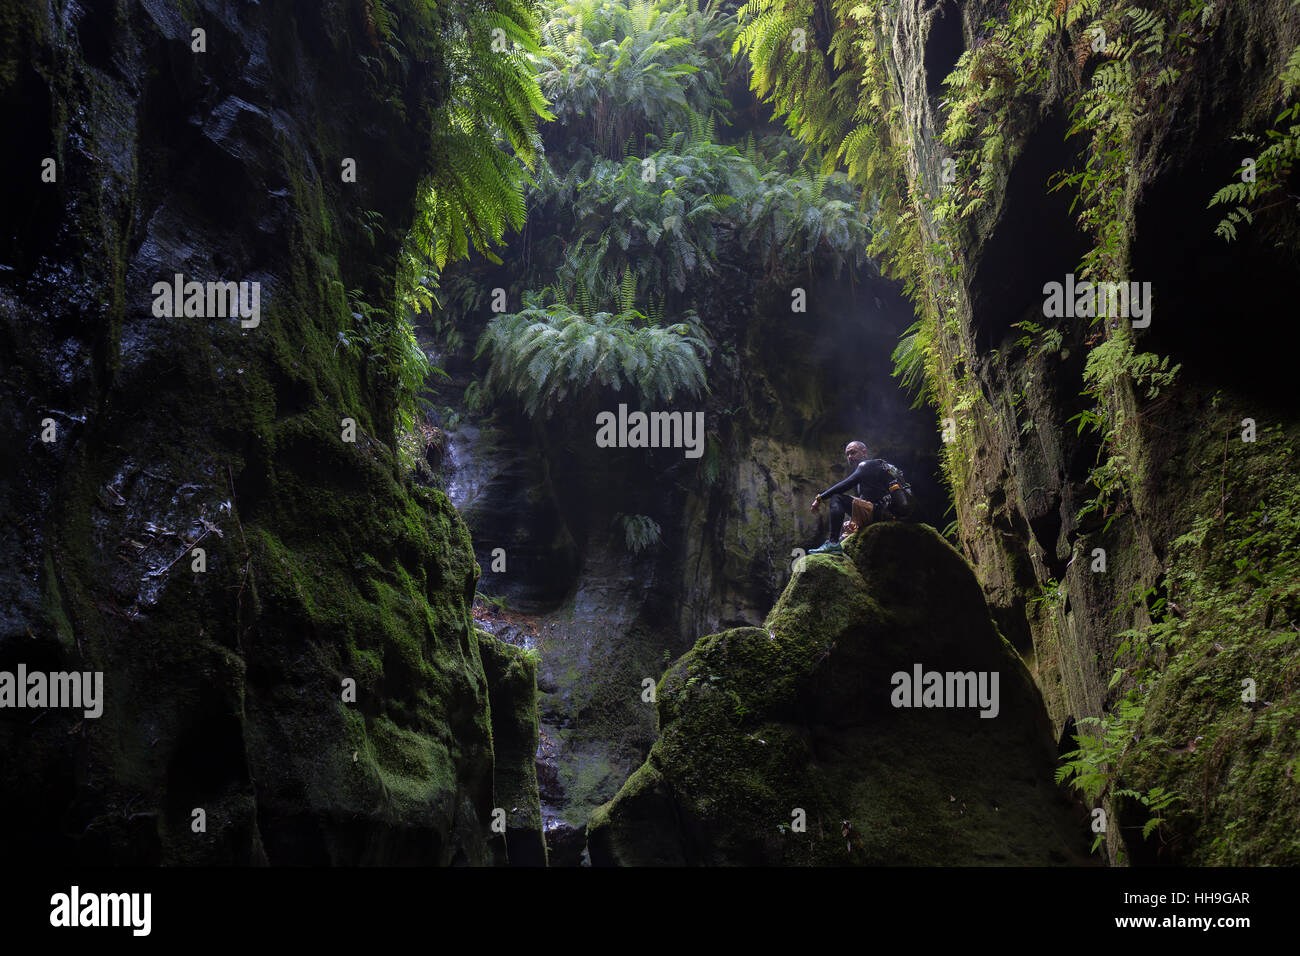 Adventure canyoning in claustral canyon in the Blue Mountains, Australia Stock Photo